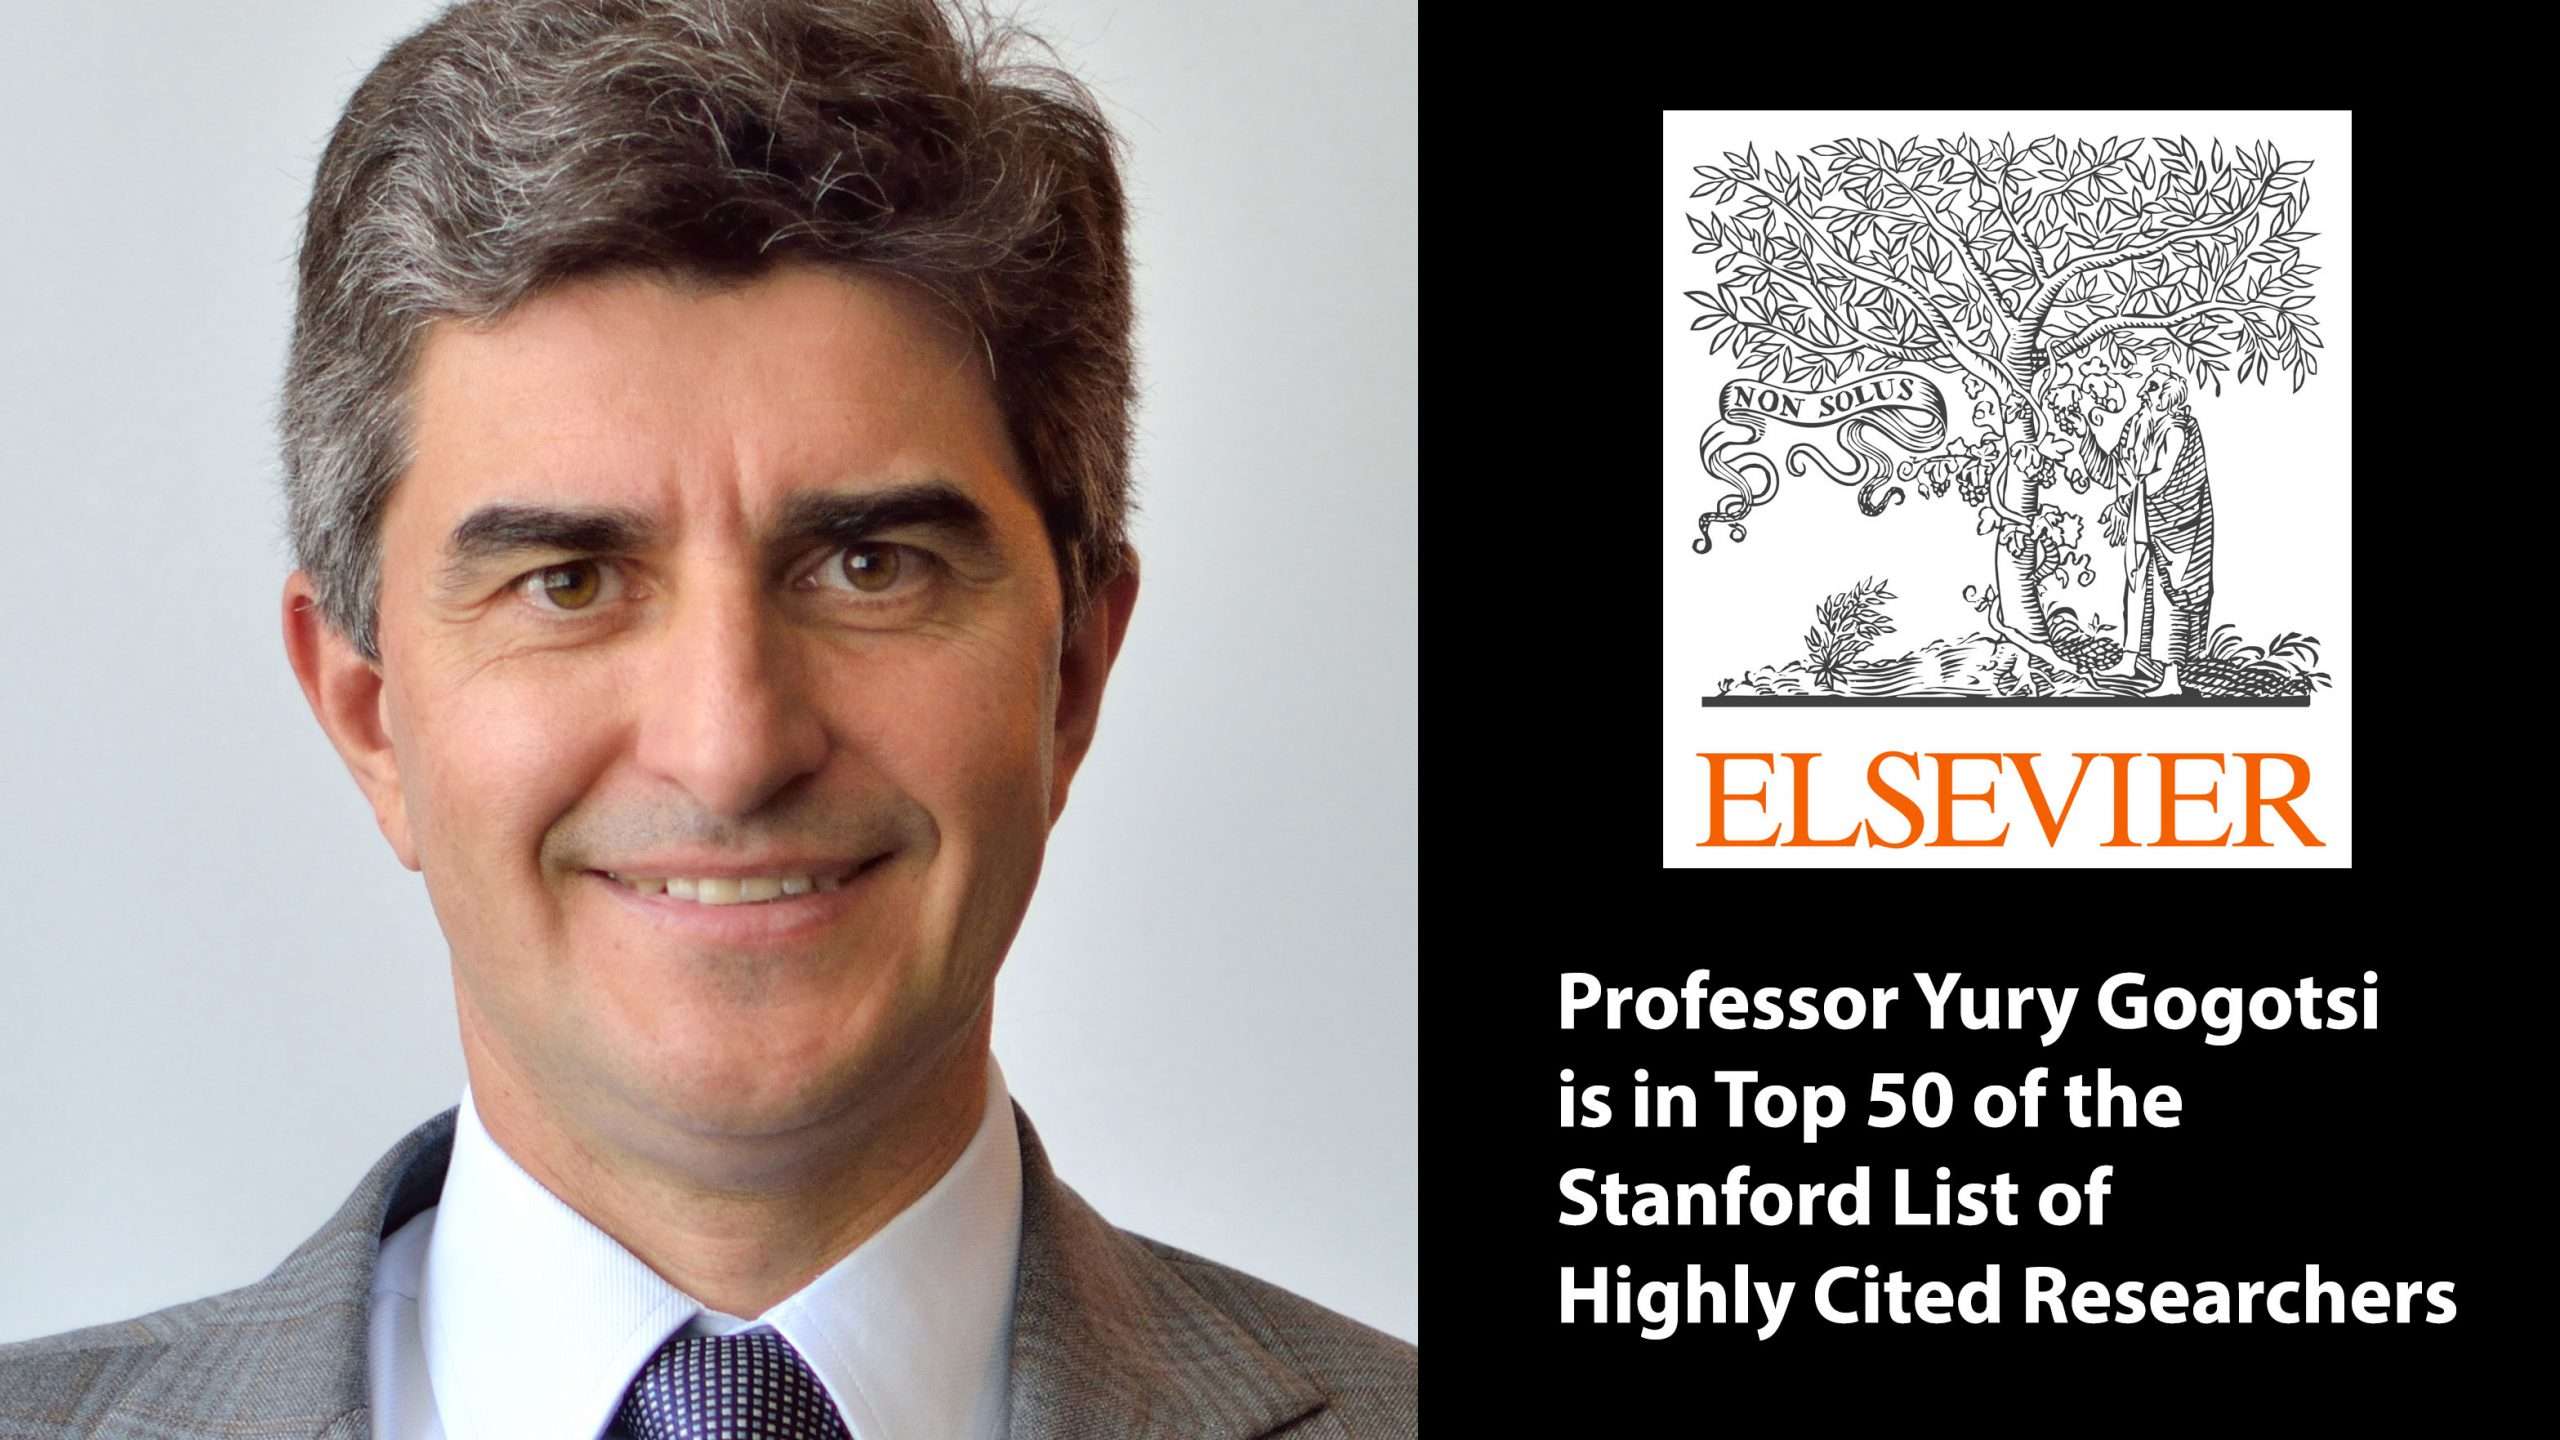 Professor Yury Gogotsi is in Top 50 of the Stanford List of Highly Cited Researchers